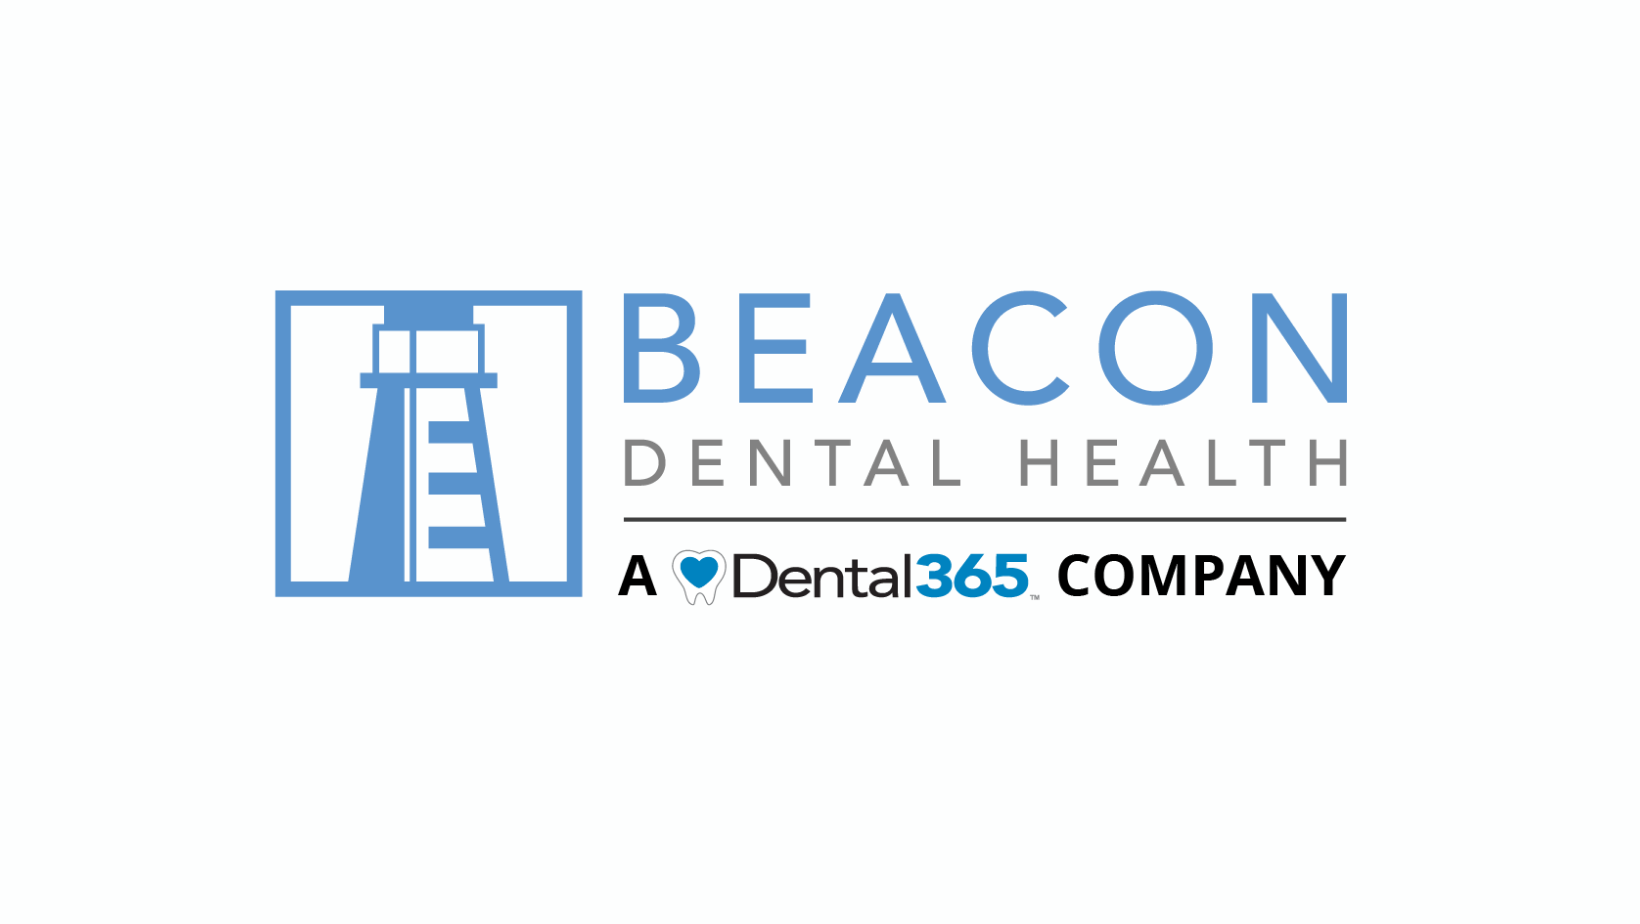 Dental365 Acquires Beacon Dental Health, Expands to New England